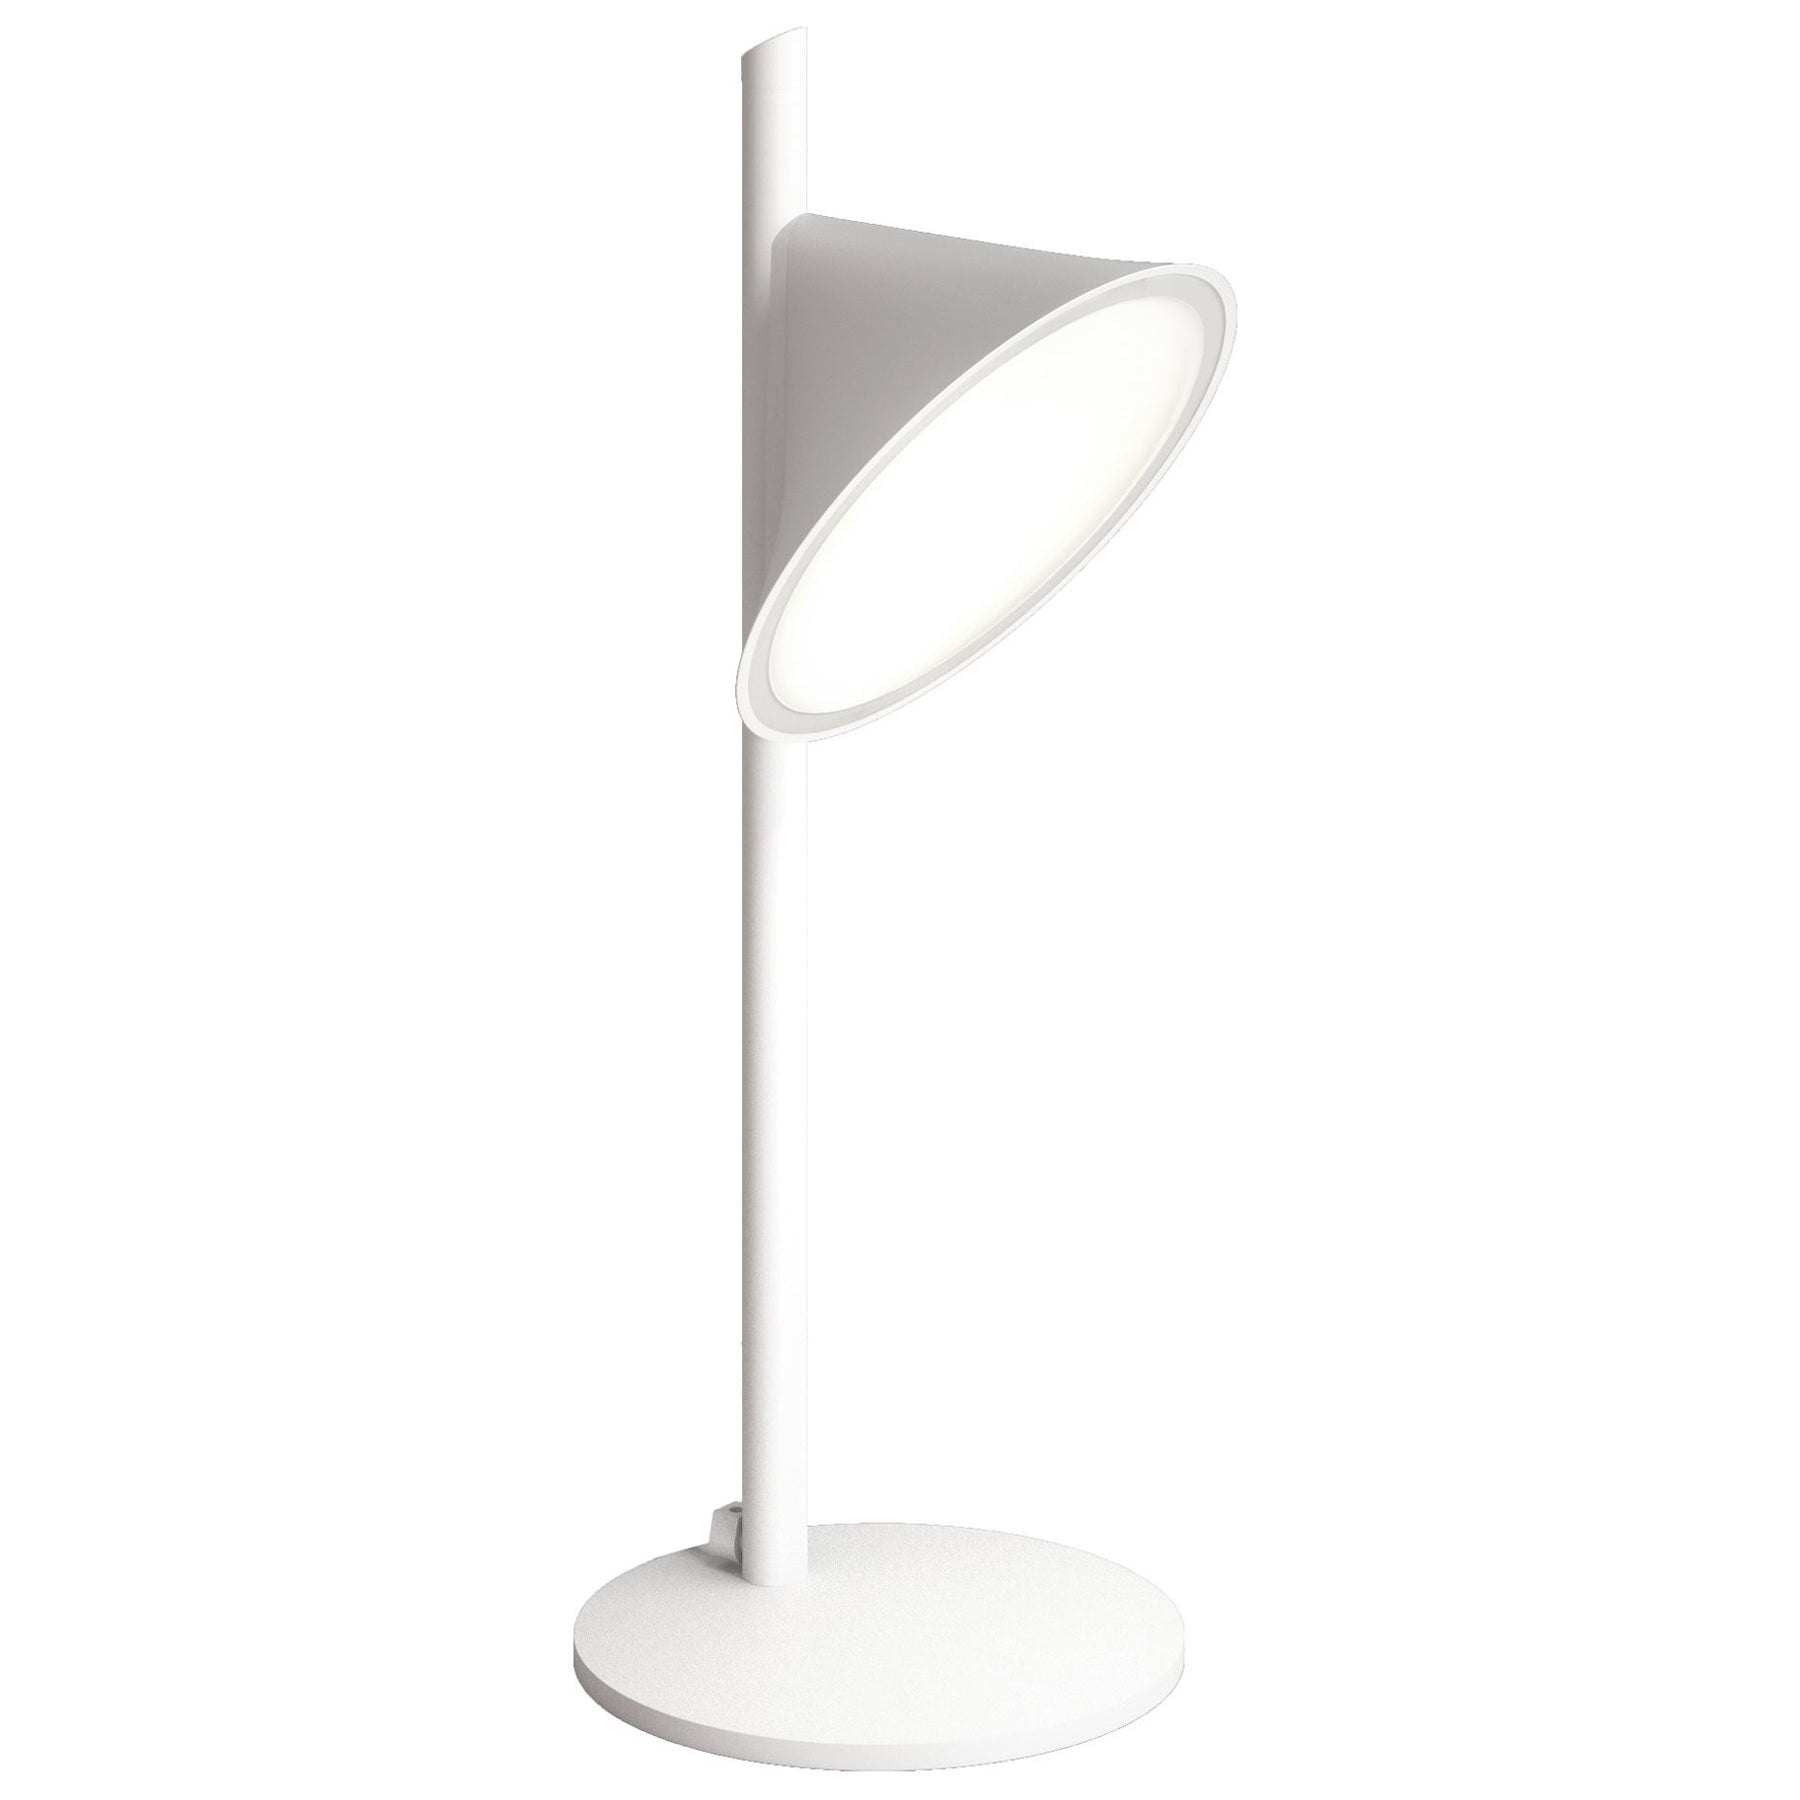 Axolight Orchid Table Lamp with Aluminum Body in White by Rainer Mutsch For Sale